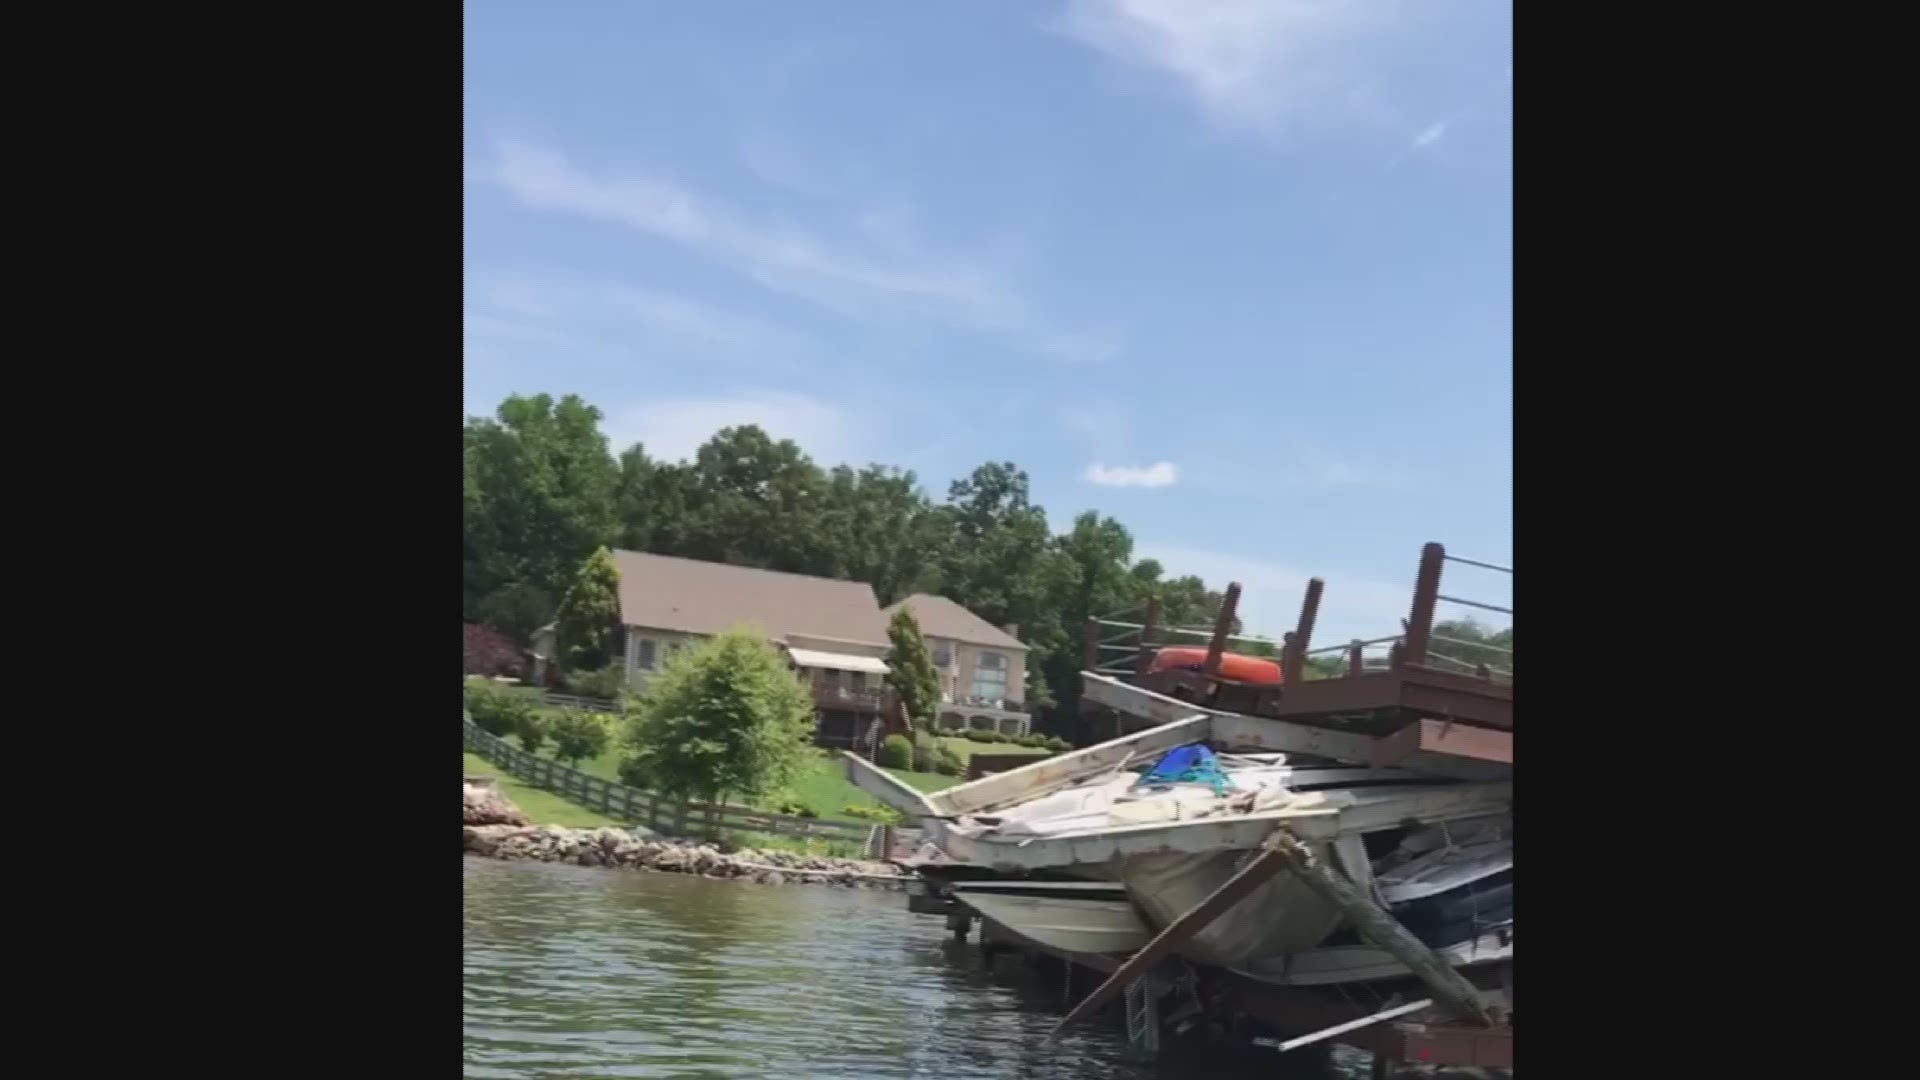 Tennessee Wildlife Resources Agency officers found the boat crashed into the unoccupied private boat dock.